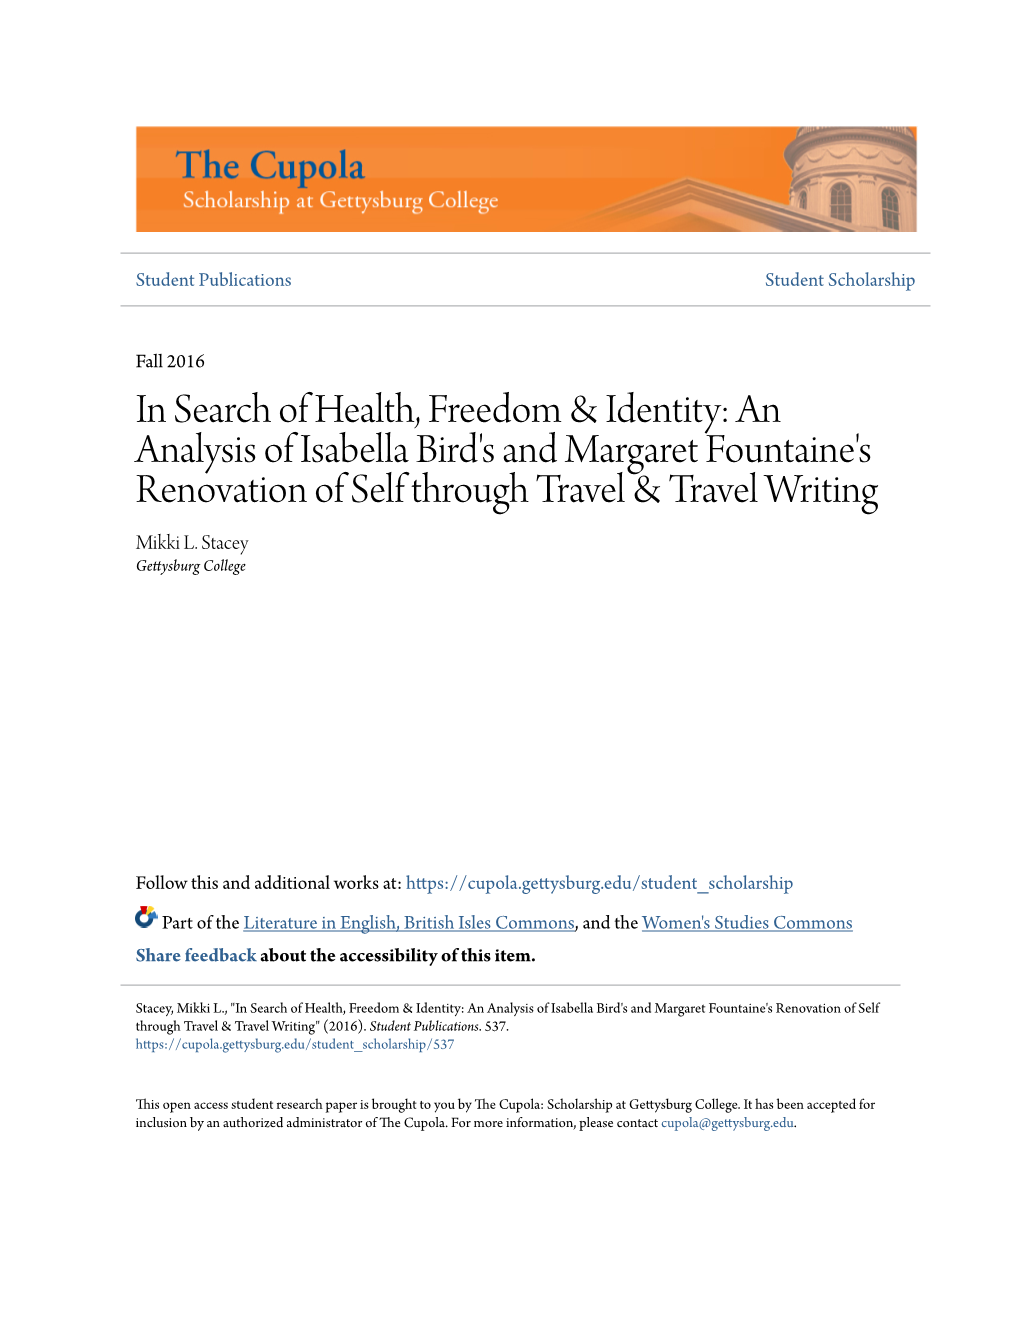 In Search of Health, Freedom & Identity: an Analysis of Isabella Bird's and Margaret Fountaine's Renovation of Self